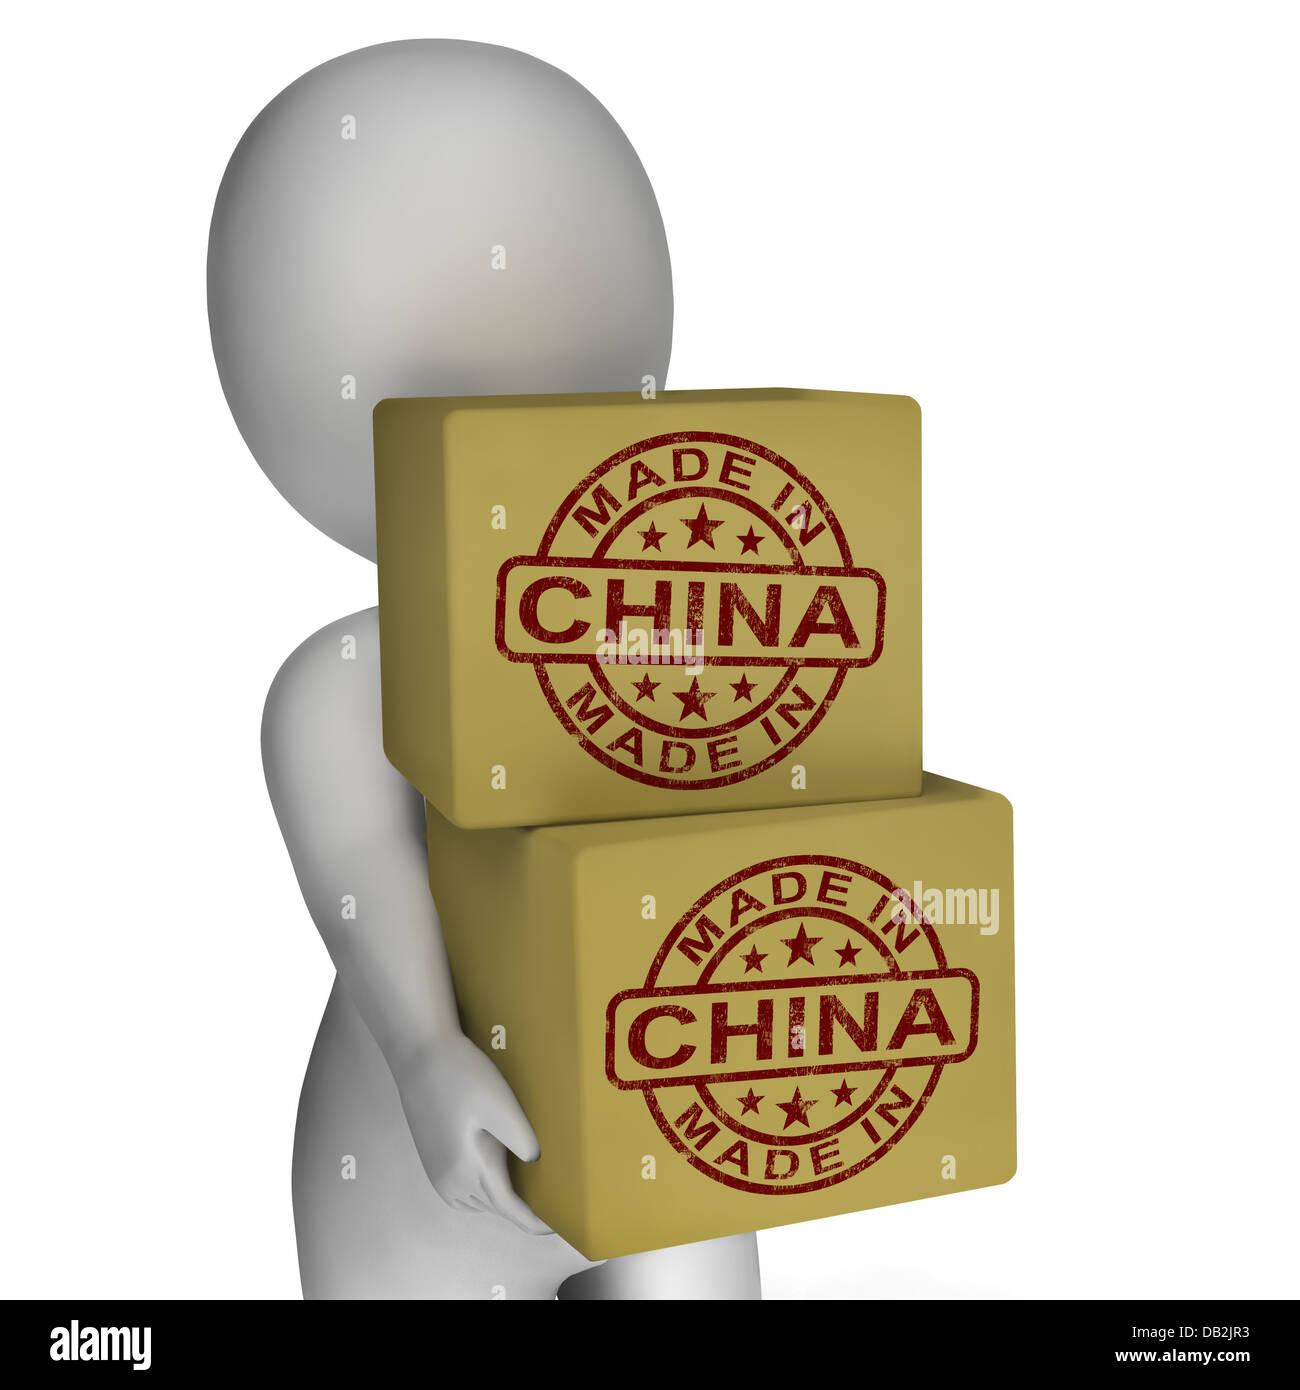 https://c8.alamy.com/comp/DB2JR3/made-in-china-stamp-on-boxes-shows-chinese-products-DB2JR3.jpg